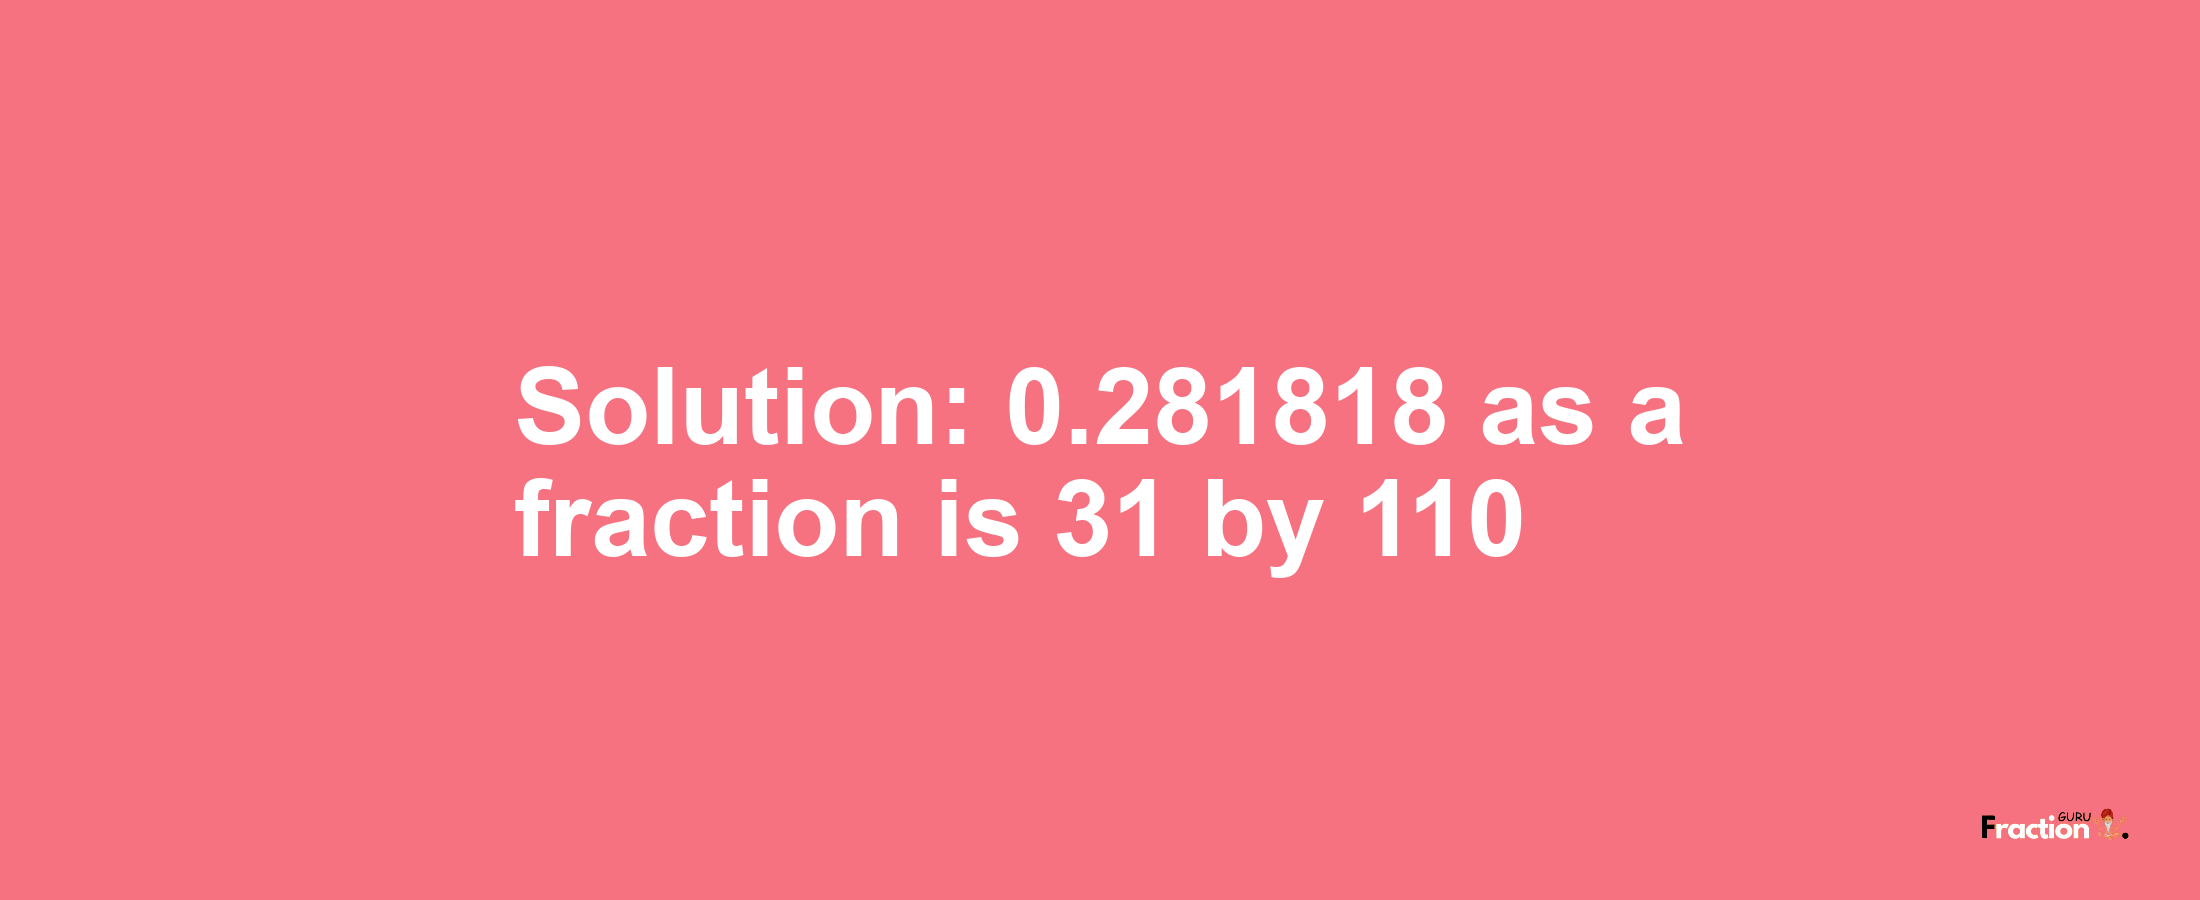 Solution:0.281818 as a fraction is 31/110